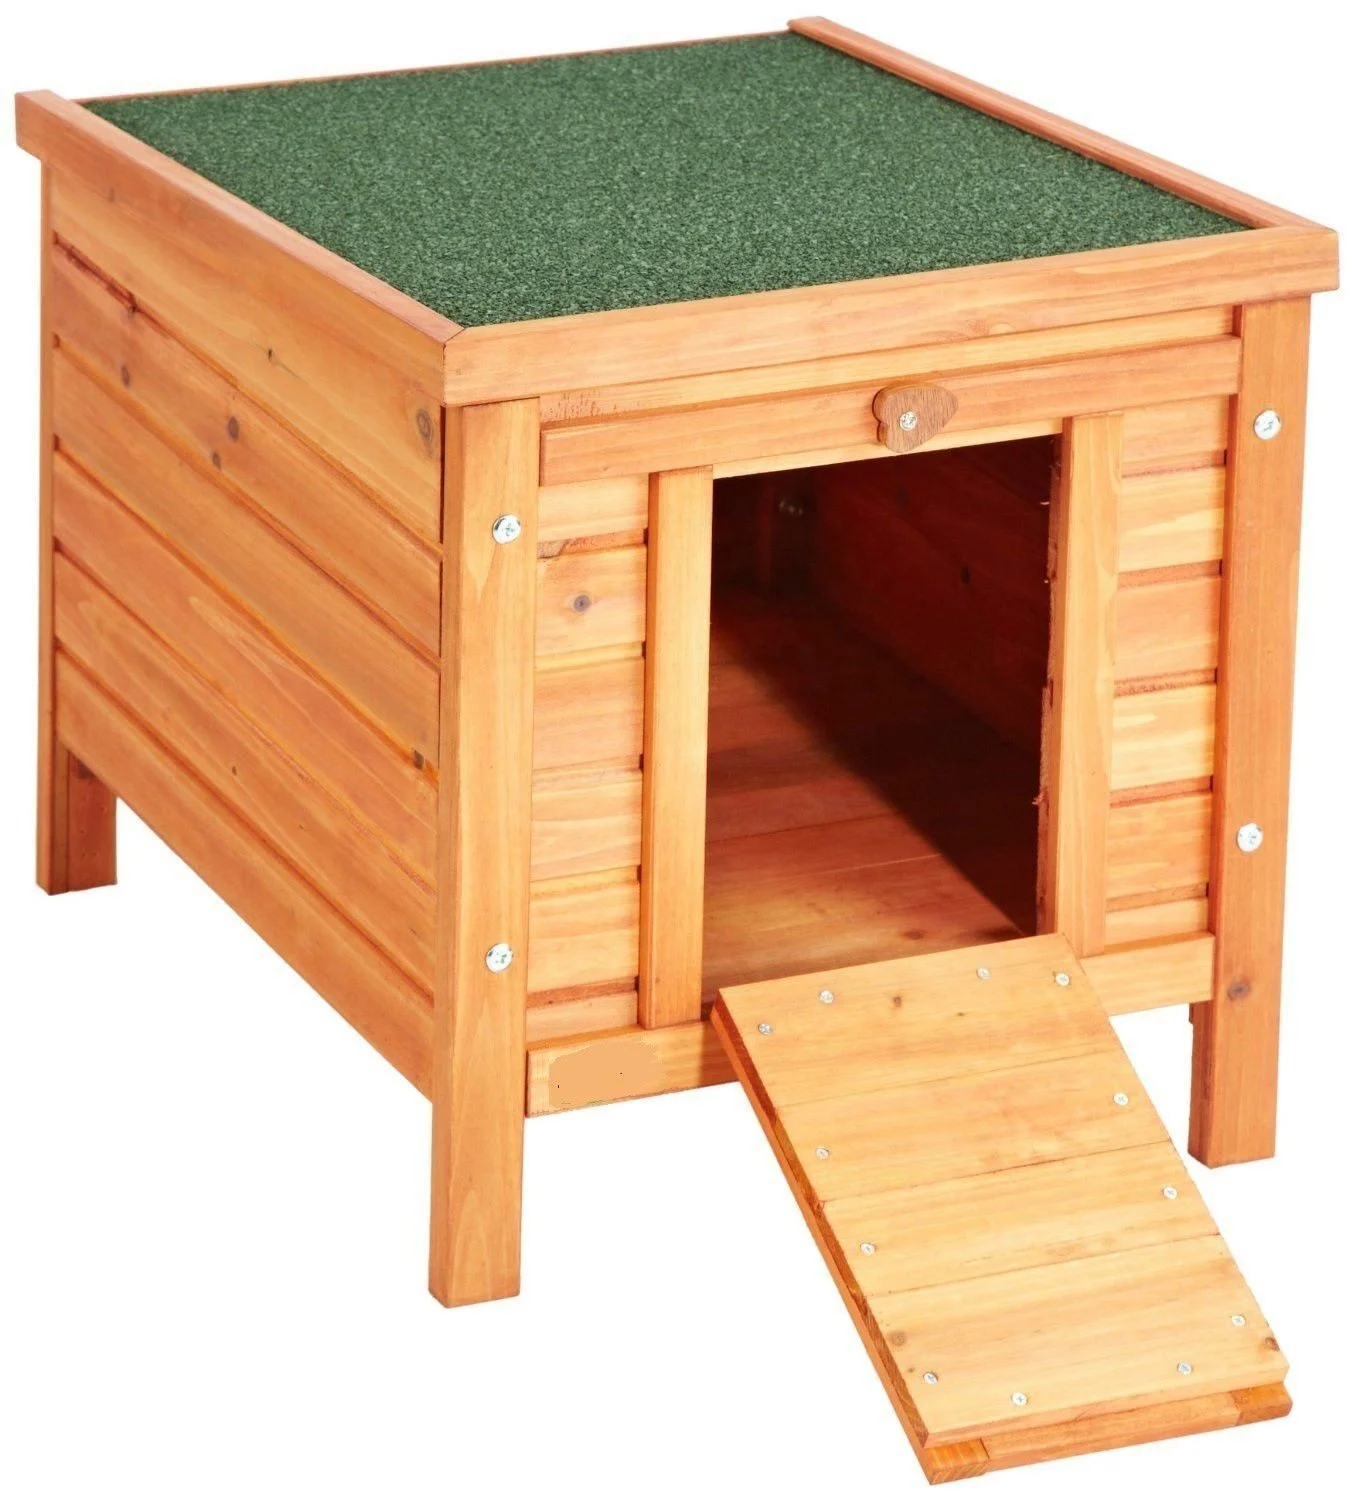 Wooden Cat Shelter Dog Rabbit Small Animal House Wood Pet Bed Kennel Hutch House  Outdoor Garden - Buy Small Animal House Wood,Animal House Wood,Small Animal  House Product on 